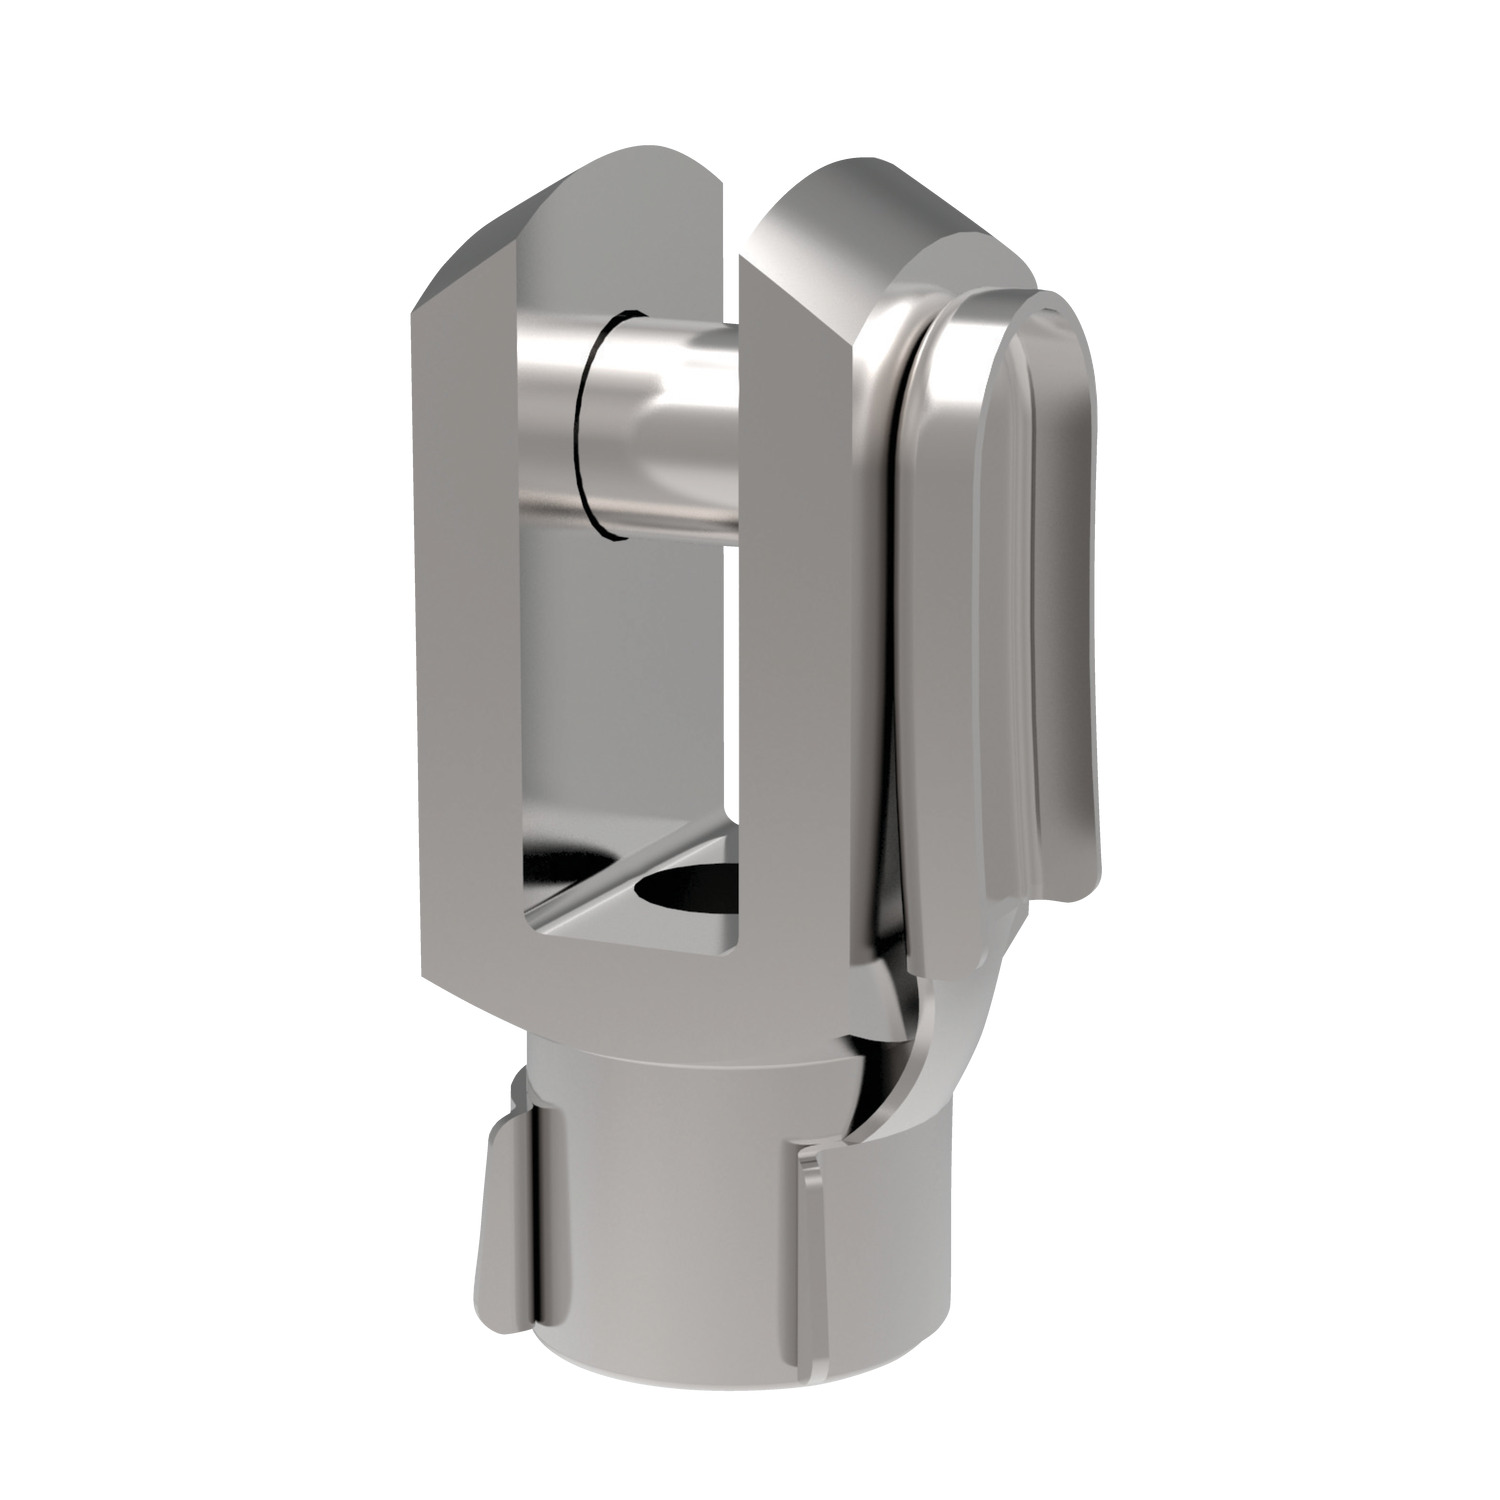 Steel Clevis Joints with Retention Clips Left hand thread Steel clevis joint and clevis retention clip.